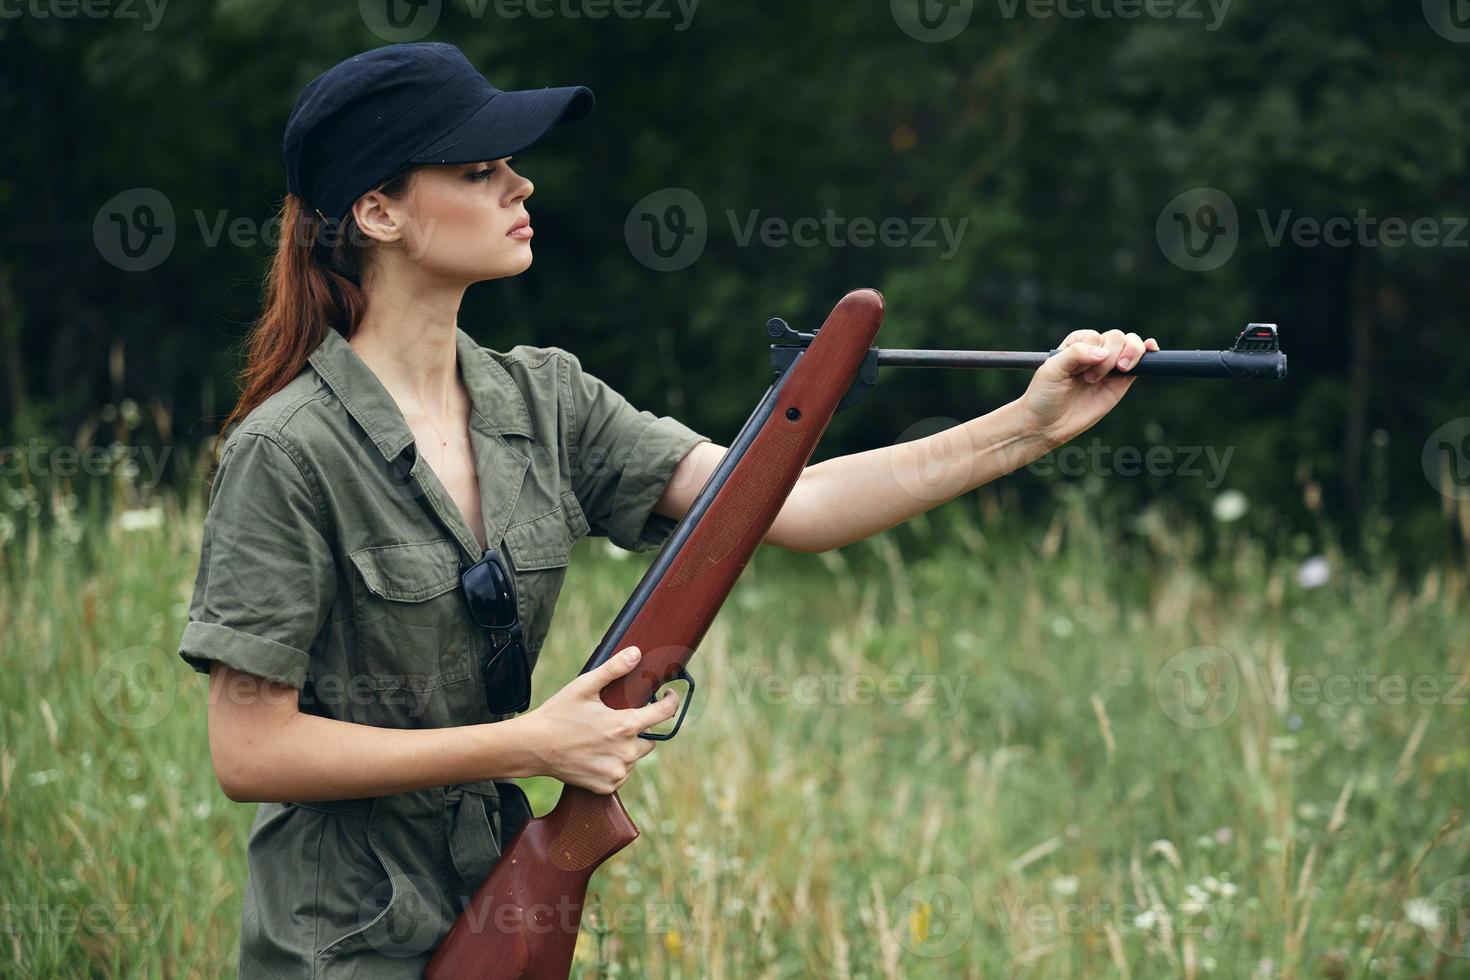 Woman on outdoor In a green overalls, reloading a gun in the background of nature weapons photo